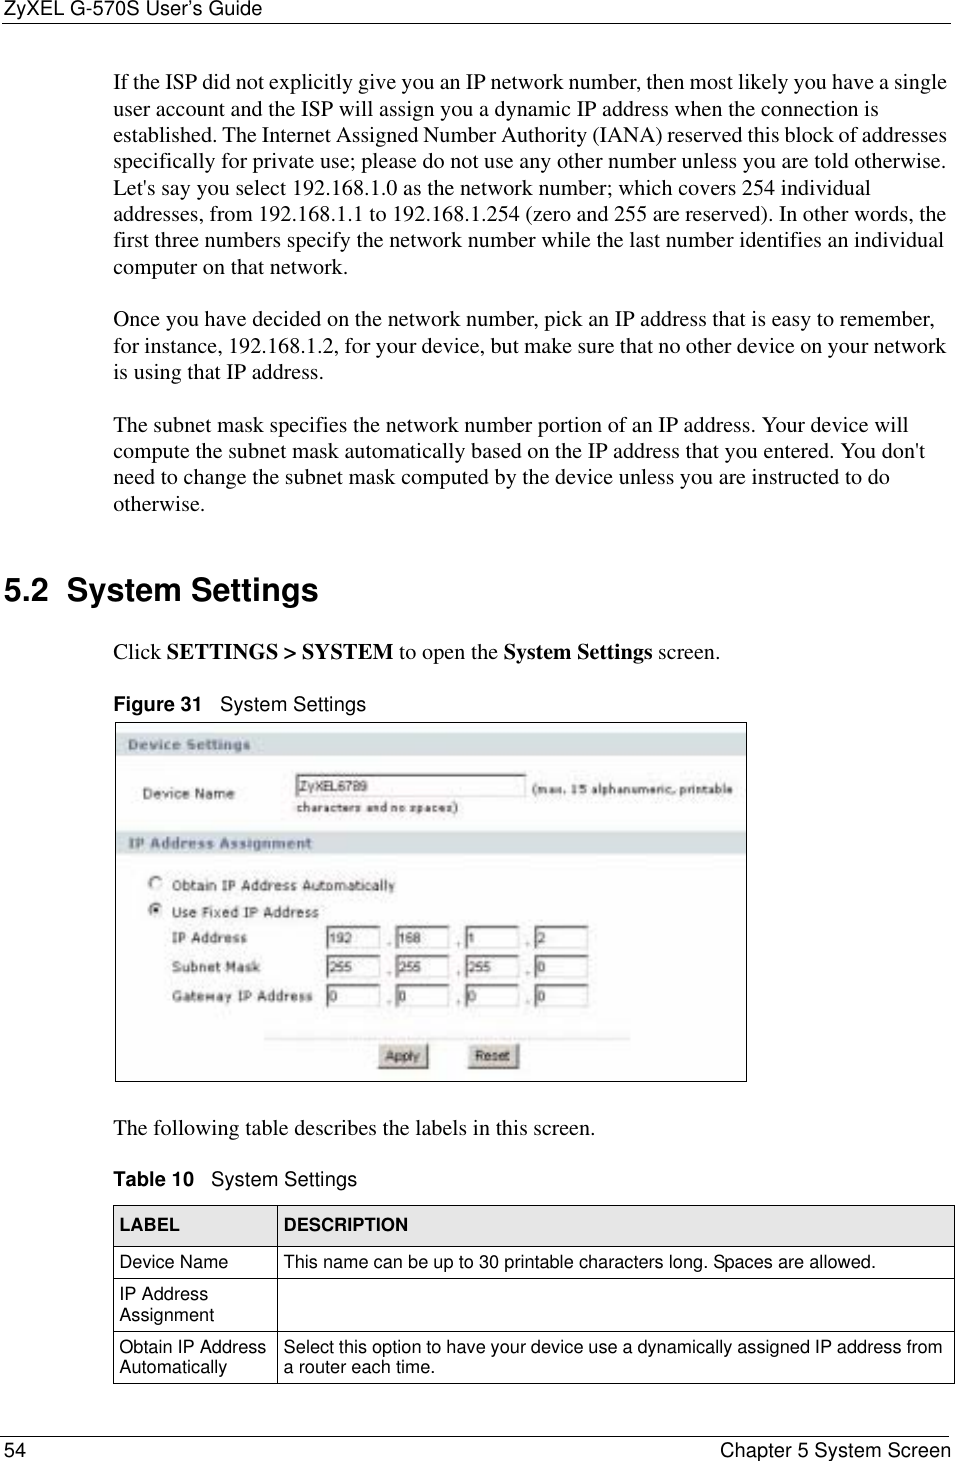 ZyXEL G-570S User’s Guide54 Chapter 5 System ScreenIf the ISP did not explicitly give you an IP network number, then most likely you have a single user account and the ISP will assign you a dynamic IP address when the connection is established. The Internet Assigned Number Authority (IANA) reserved this block of addresses specifically for private use; please do not use any other number unless you are told otherwise. Let&apos;s say you select 192.168.1.0 as the network number; which covers 254 individual addresses, from 192.168.1.1 to 192.168.1.254 (zero and 255 are reserved). In other words, the first three numbers specify the network number while the last number identifies an individual computer on that network.Once you have decided on the network number, pick an IP address that is easy to remember, for instance, 192.168.1.2, for your device, but make sure that no other device on your network is using that IP address.The subnet mask specifies the network number portion of an IP address. Your device will compute the subnet mask automatically based on the IP address that you entered. You don&apos;t need to change the subnet mask computed by the device unless you are instructed to do otherwise.5.2  System Settings Click SETTINGS &gt; SYSTEM to open the System Settings screen.Figure 31   System SettingsThe following table describes the labels in this screen. Table 10   System SettingsLABEL DESCRIPTIONDevice Name This name can be up to 30 printable characters long. Spaces are allowed.IP Address AssignmentObtain IP Address Automatically Select this option to have your device use a dynamically assigned IP address from a router each time.